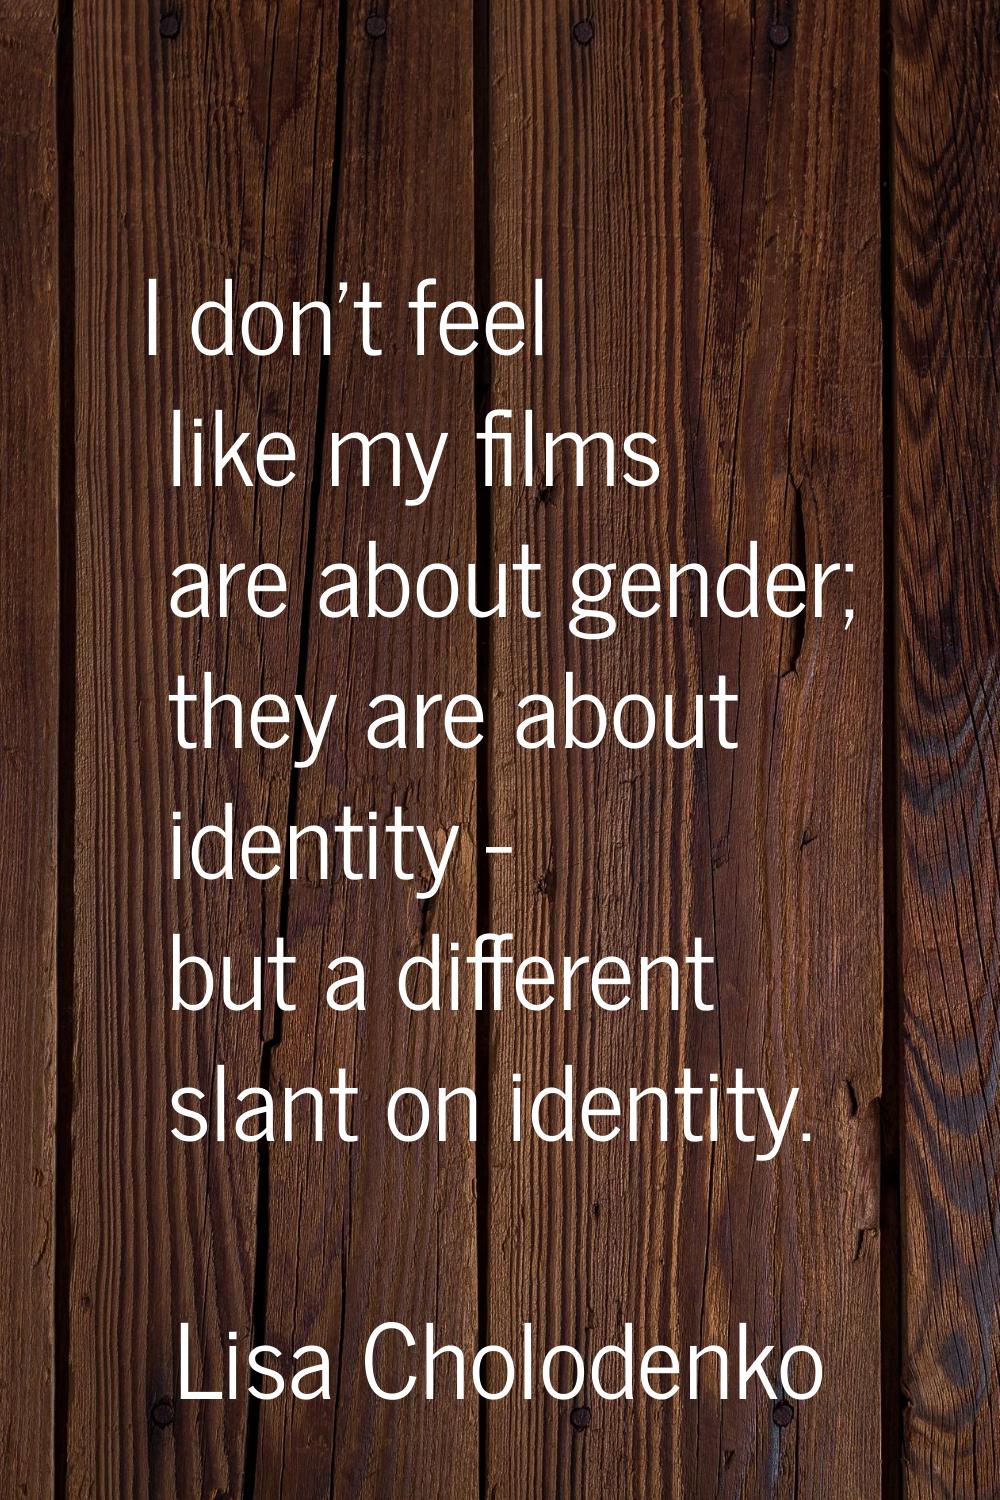 I don't feel like my films are about gender; they are about identity - but a different slant on ide